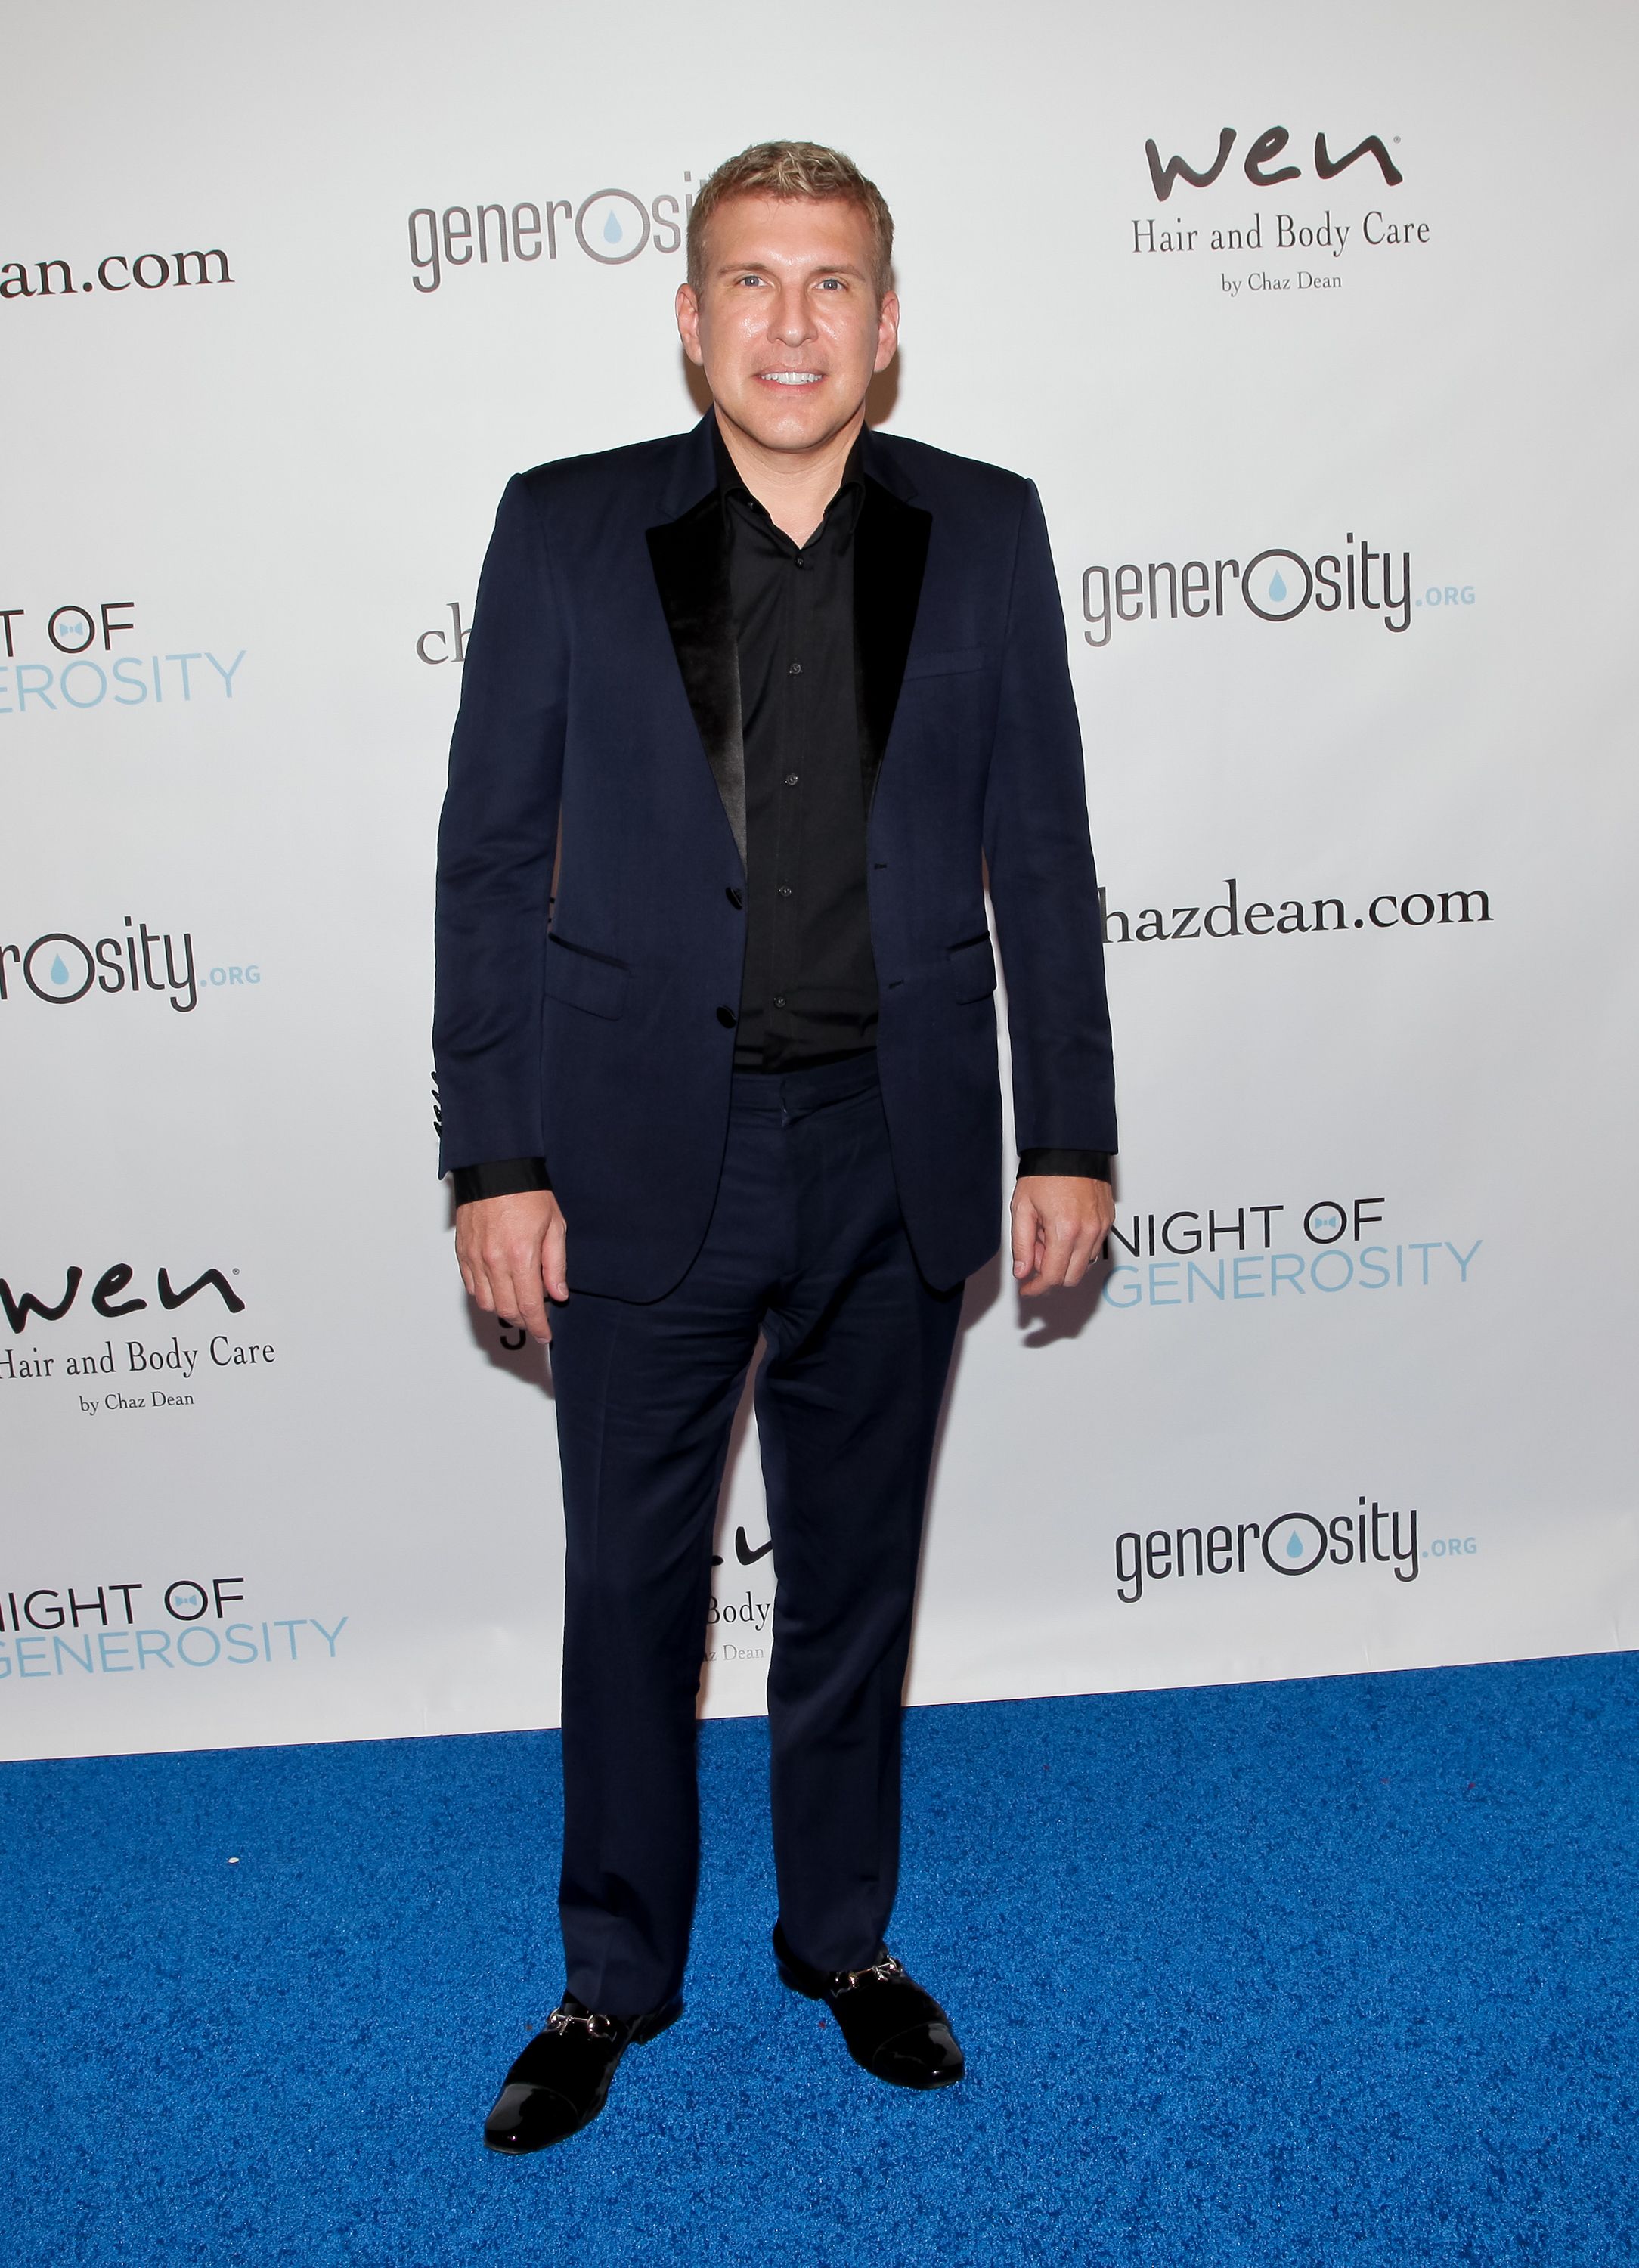 Todd Chrisley during the 7th Annual 'Night of Generosity' Gala benefiting generosity.org at the Beverly Wilshire Four Seasons Hotel on November 6, 2015 in Beverly Hills, California. | Source: Getty Images